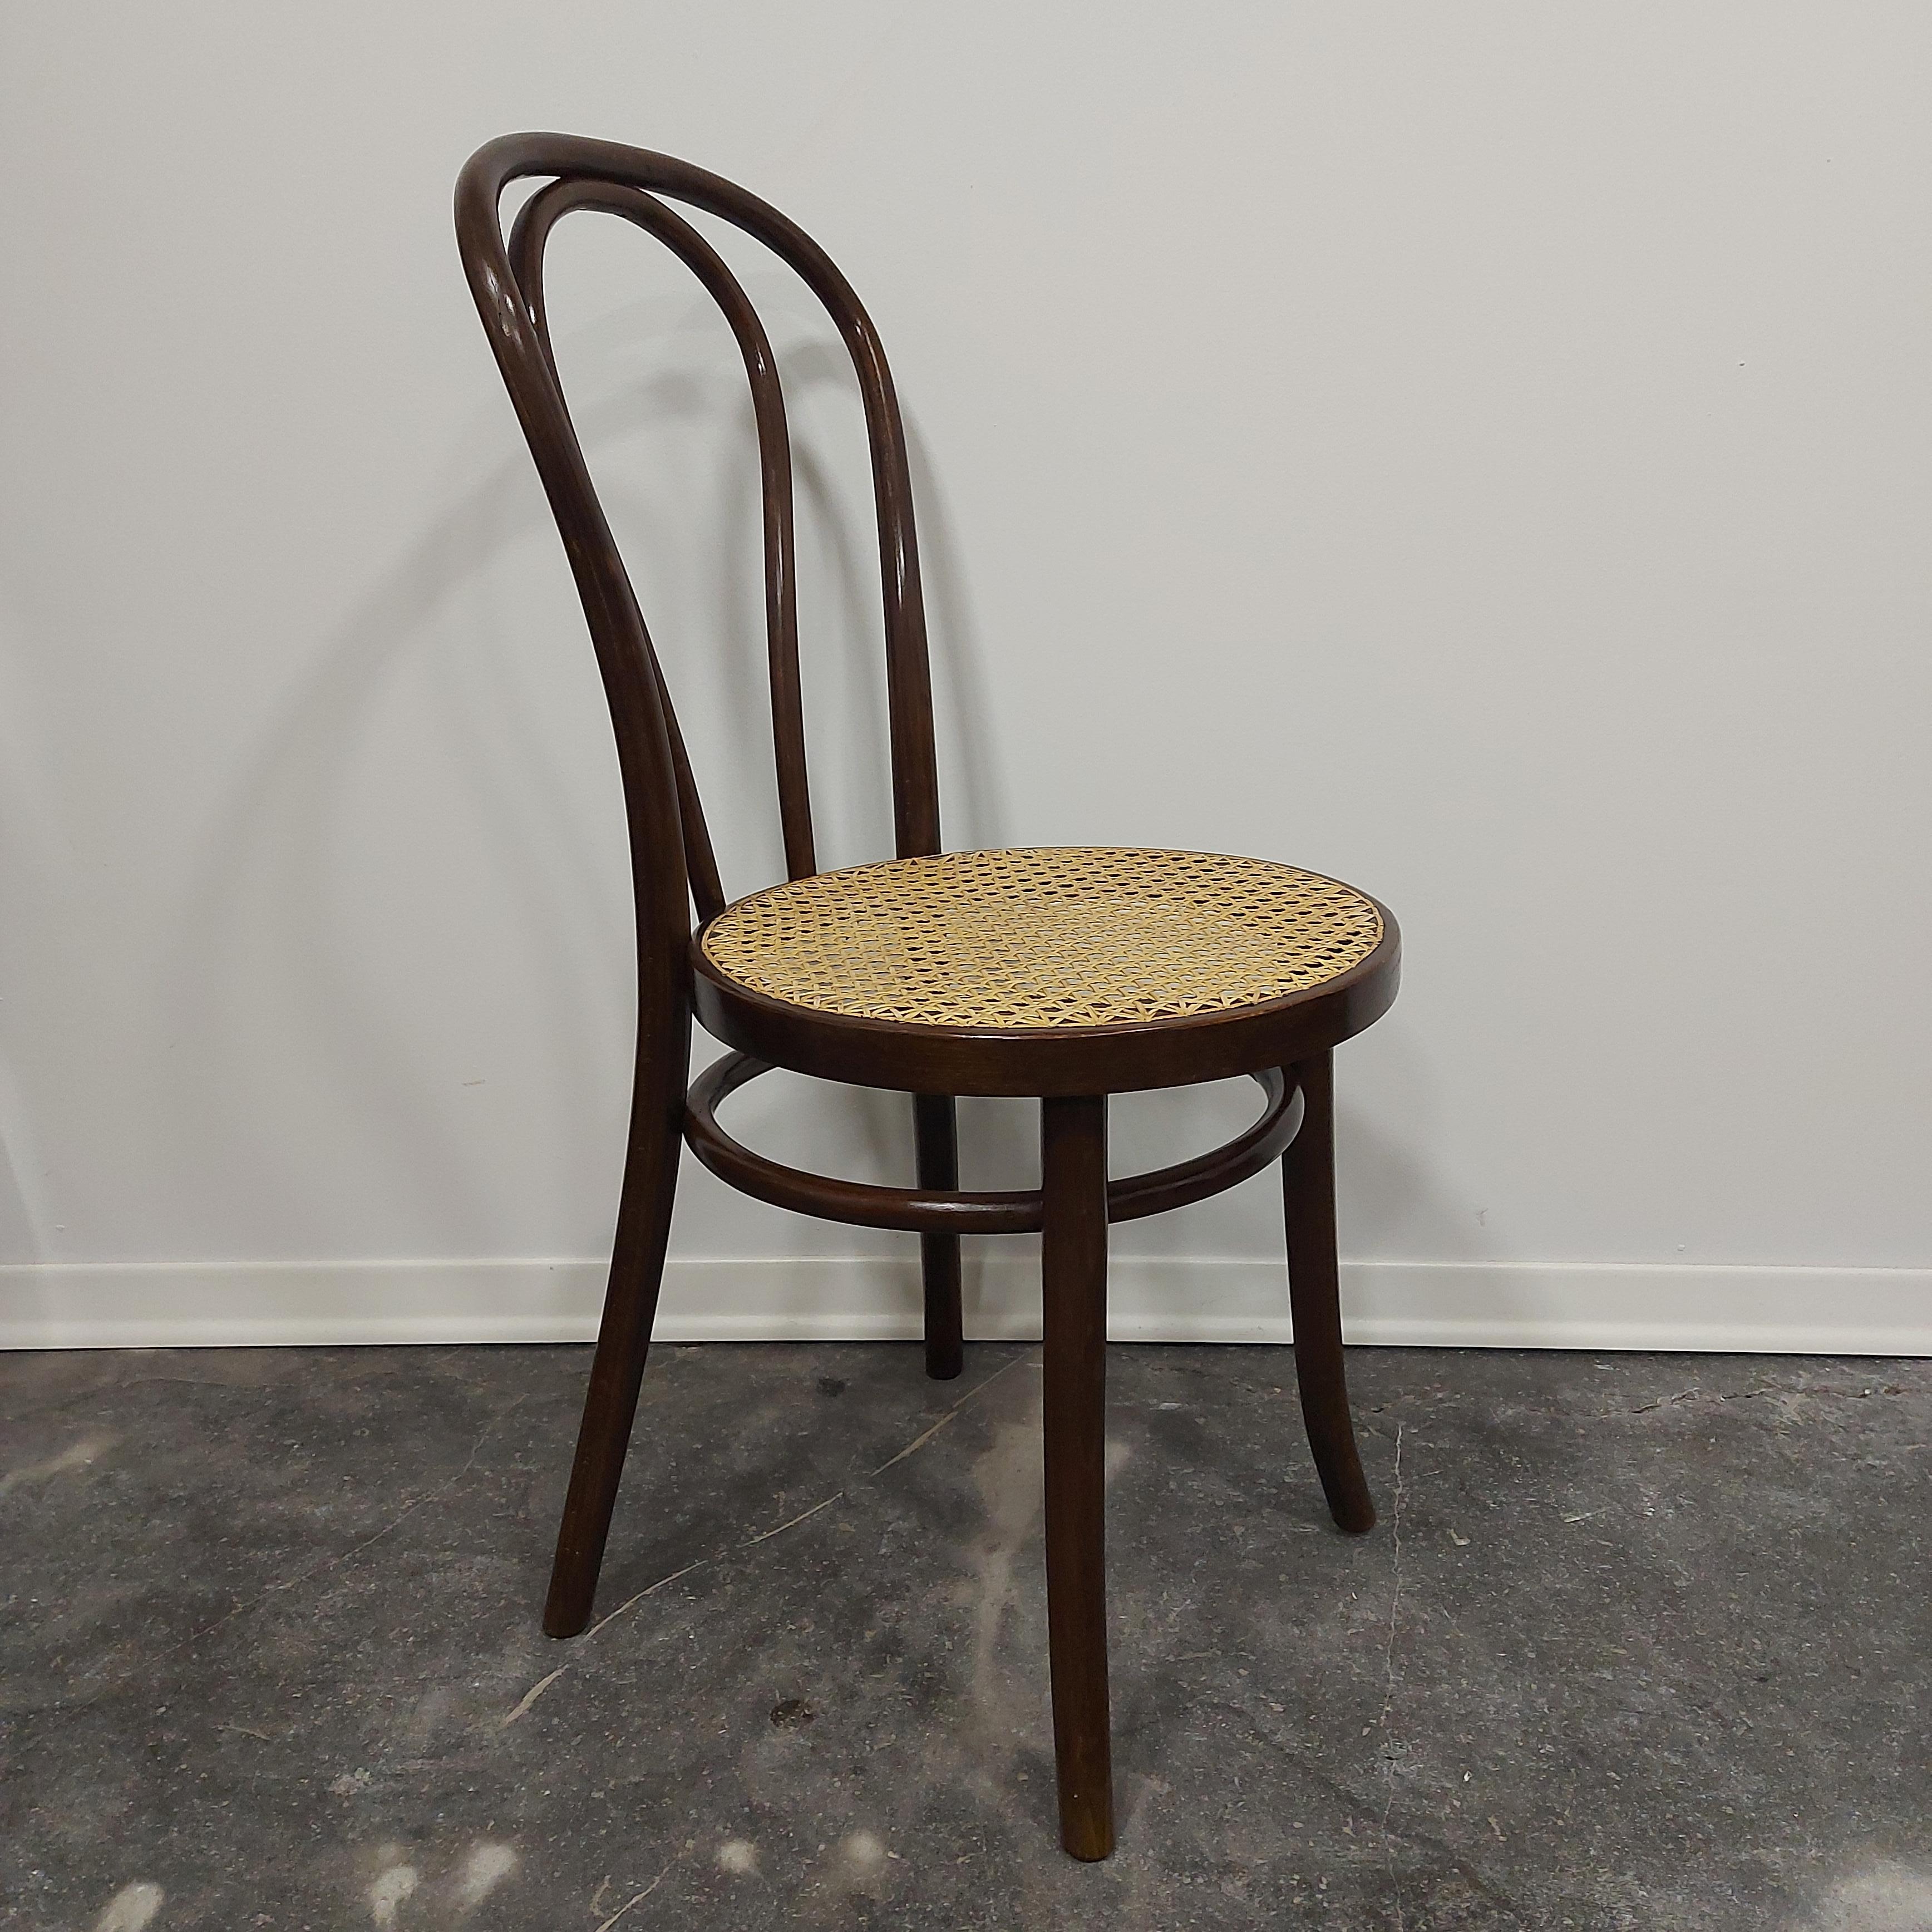 Thonet N.18 Beech and Vienna Straw Chair 1960s For Sale 5